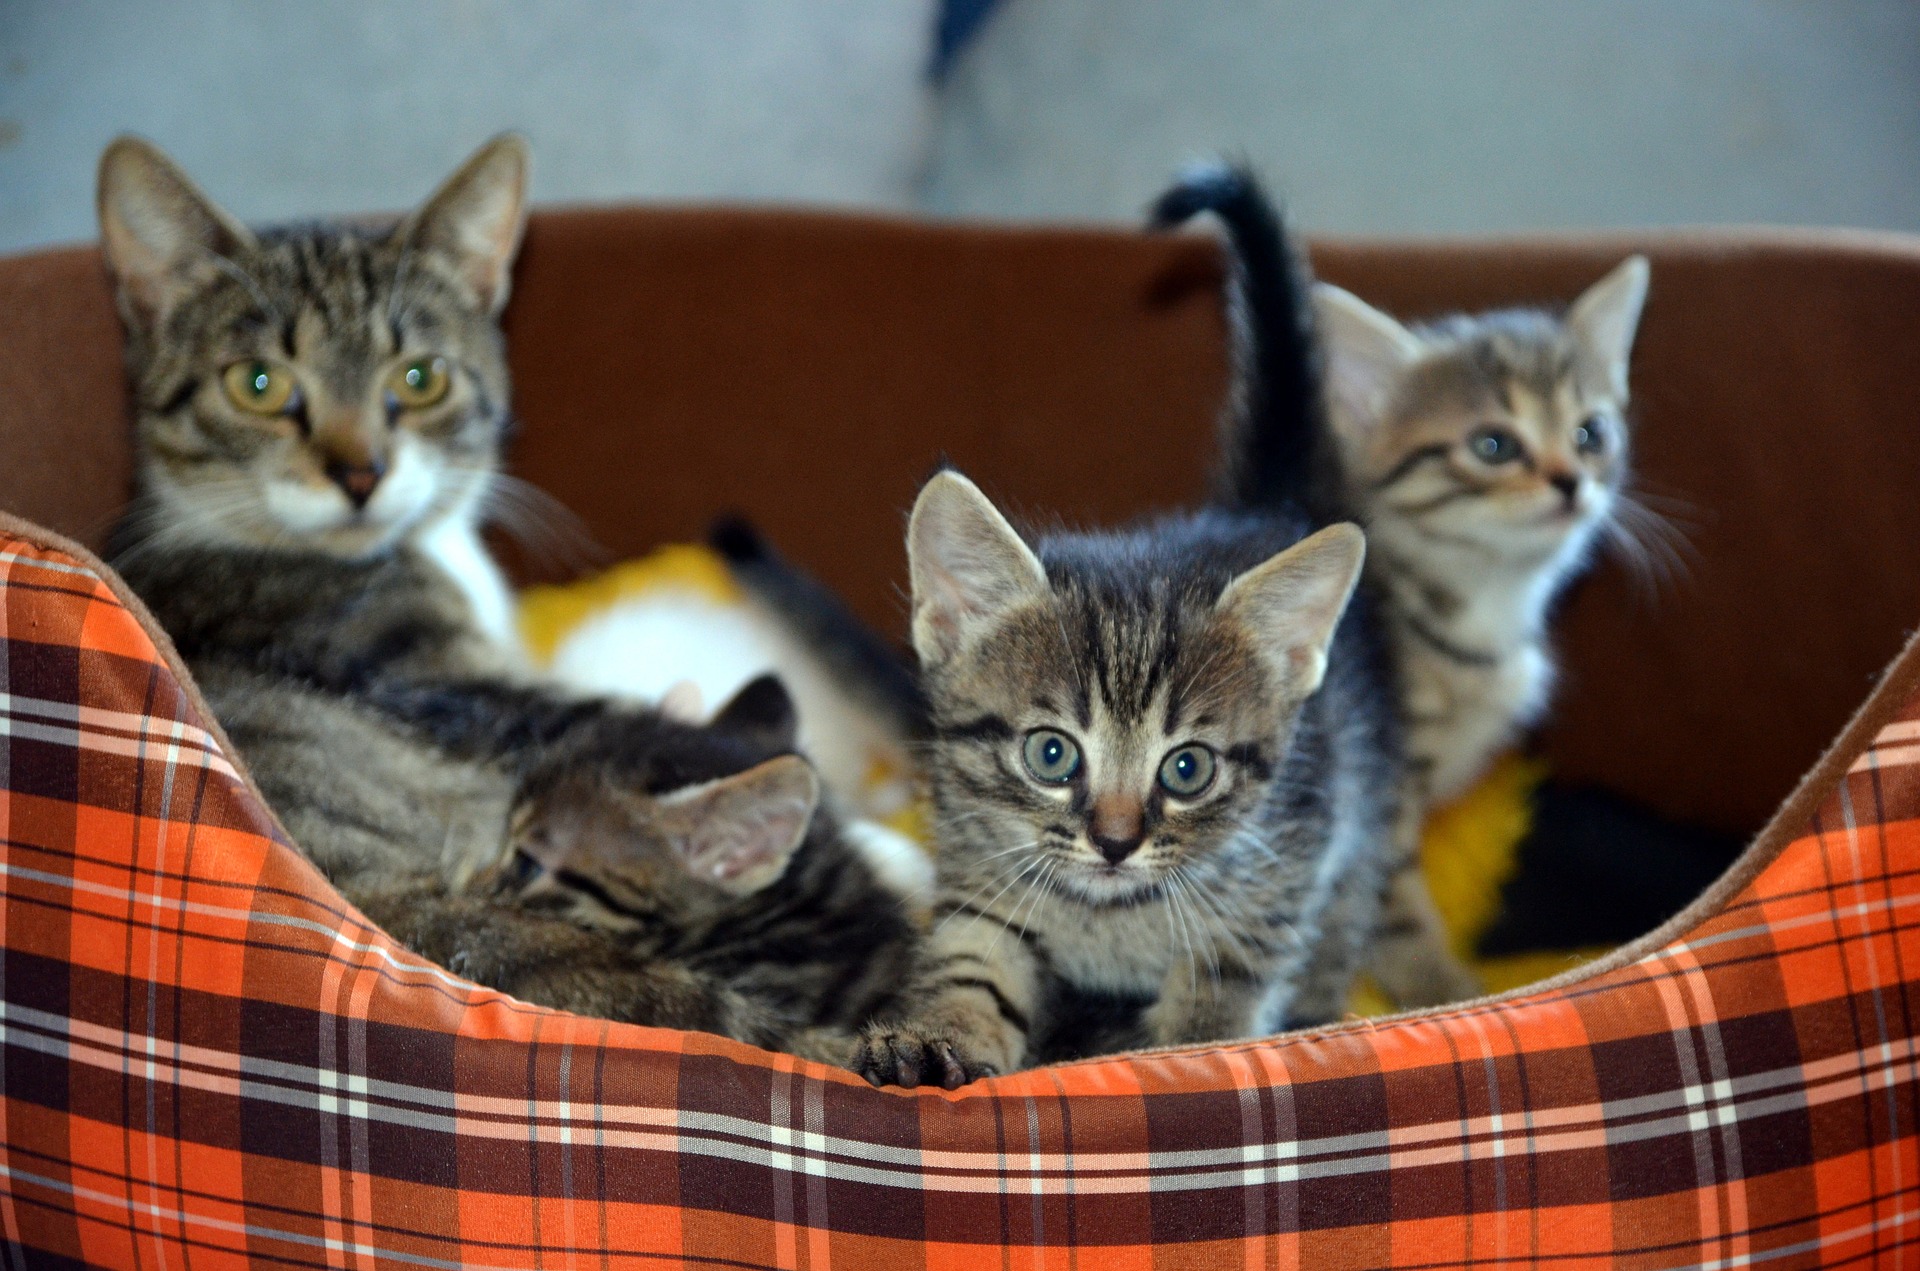 A gray tabby momma cat and her kittens lounging in a tartan cat bed in an apartment